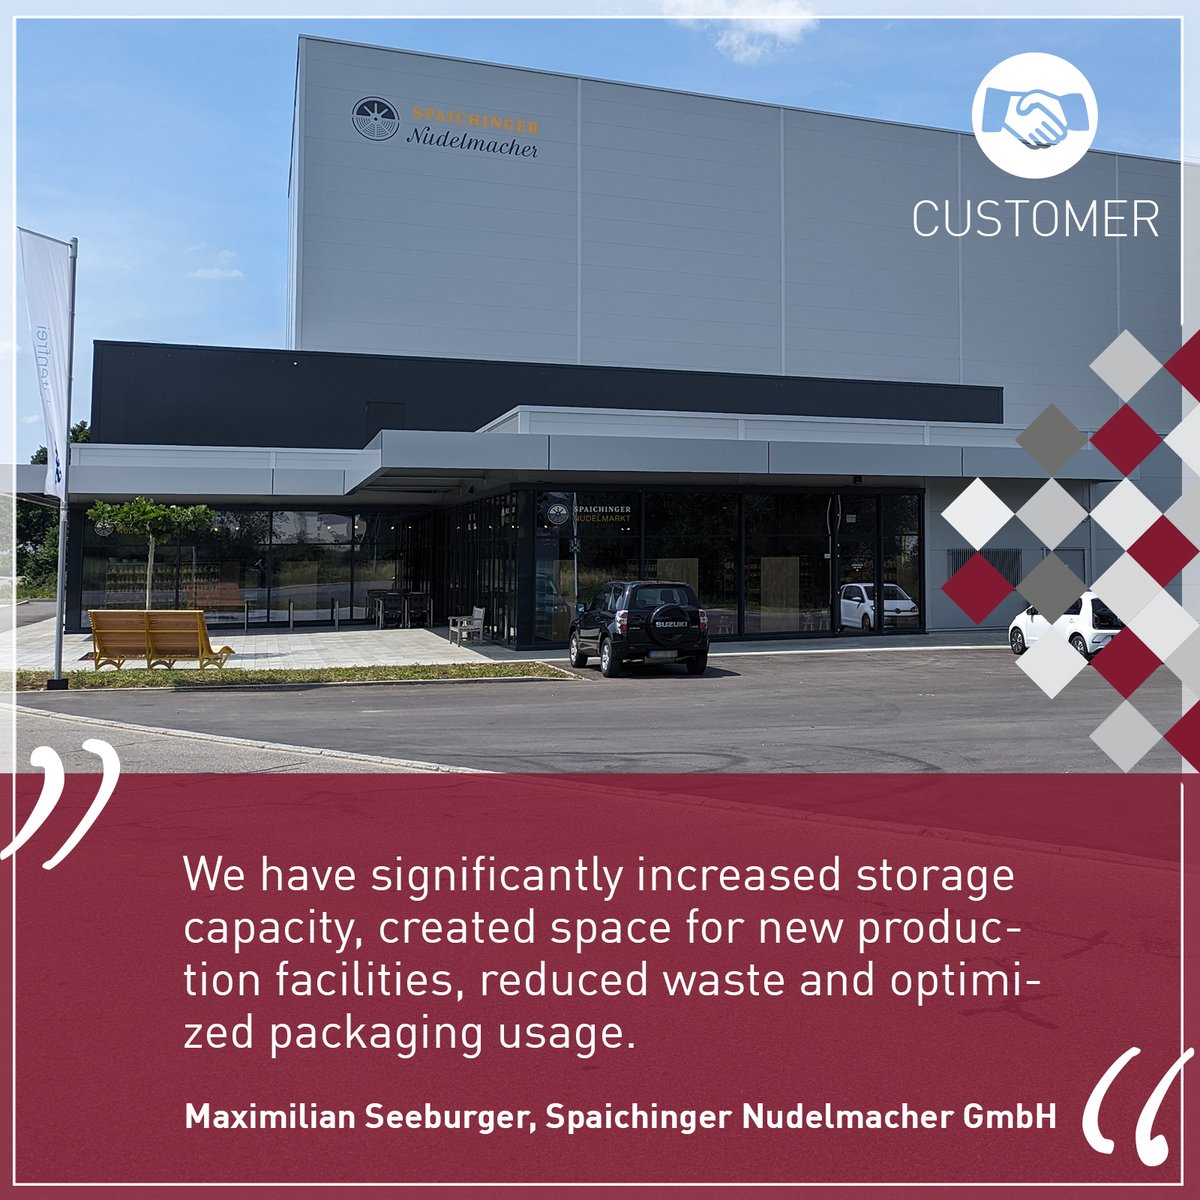 More storage, more production, less packaging & bundled #logistics for one of the most modern #pasta production companies in Europe. The new automated #storage system for Spaichinger Nudelmacher GmbH is planned as a central warehouse of @ALB_GOLD bit.ly/3EzsV7J #food